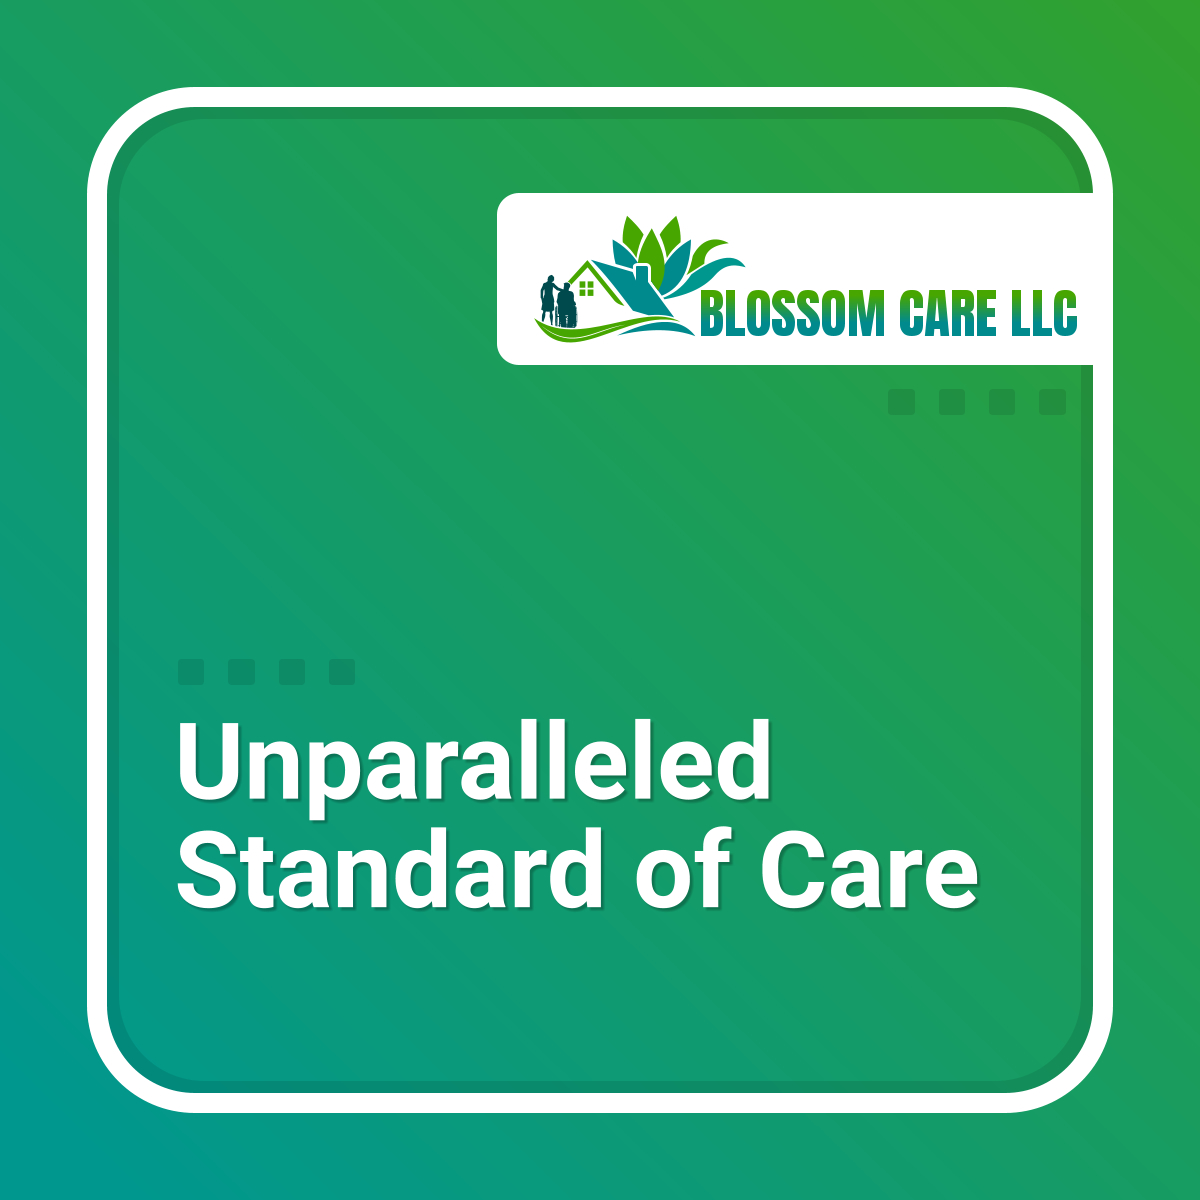 Blossom Care LLC offers exceptional and individualized solutions for your unique care needs. We are committed to providing a reliable and high standard of care to help individuals and their families.

#Homecare #DallasTX #UniqueCare #ReliableCare